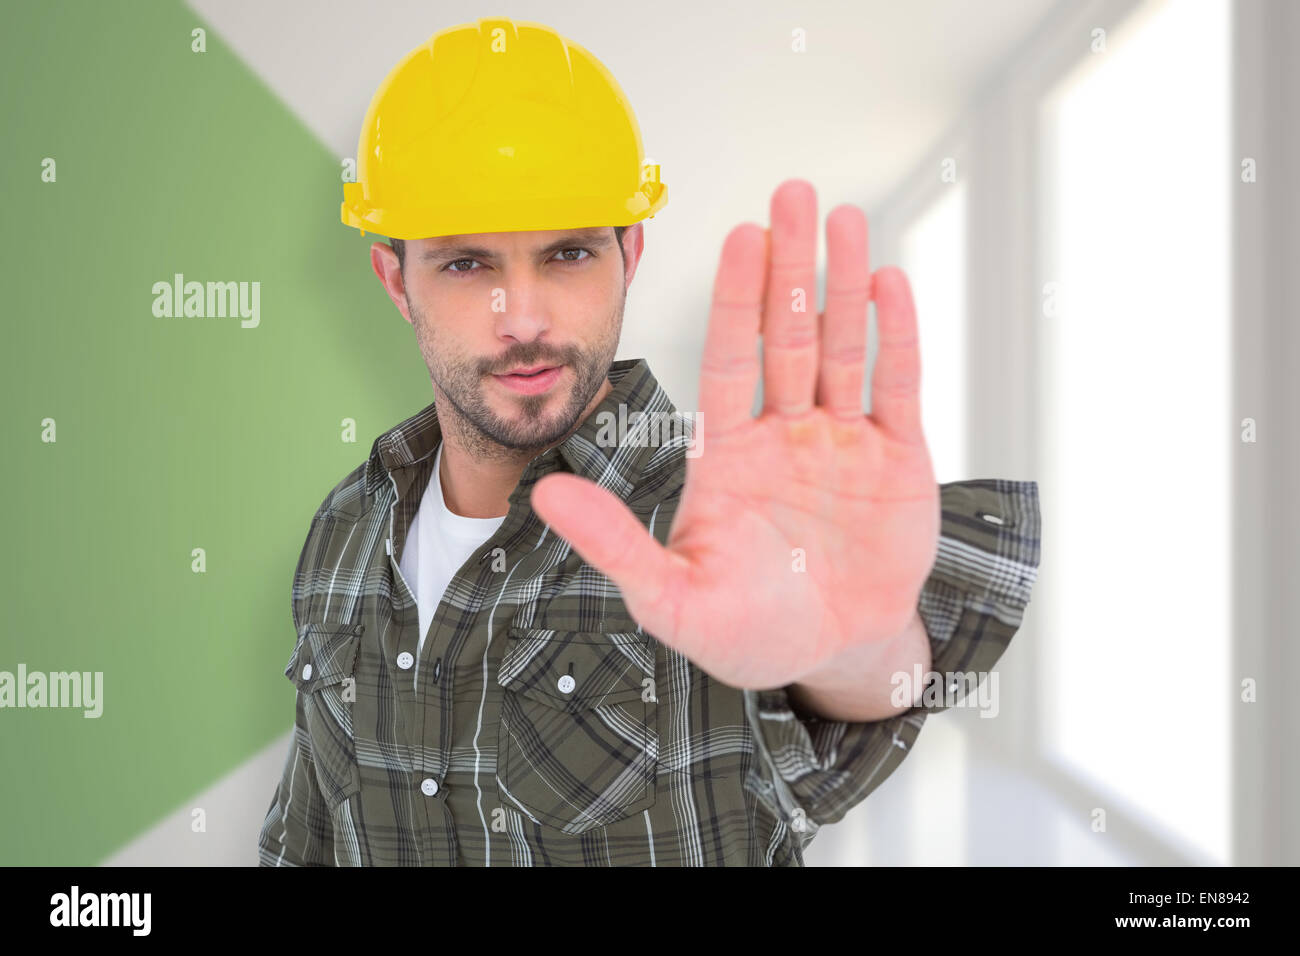 Composite image of confident manual worker gesturing stop sign Stock Photo